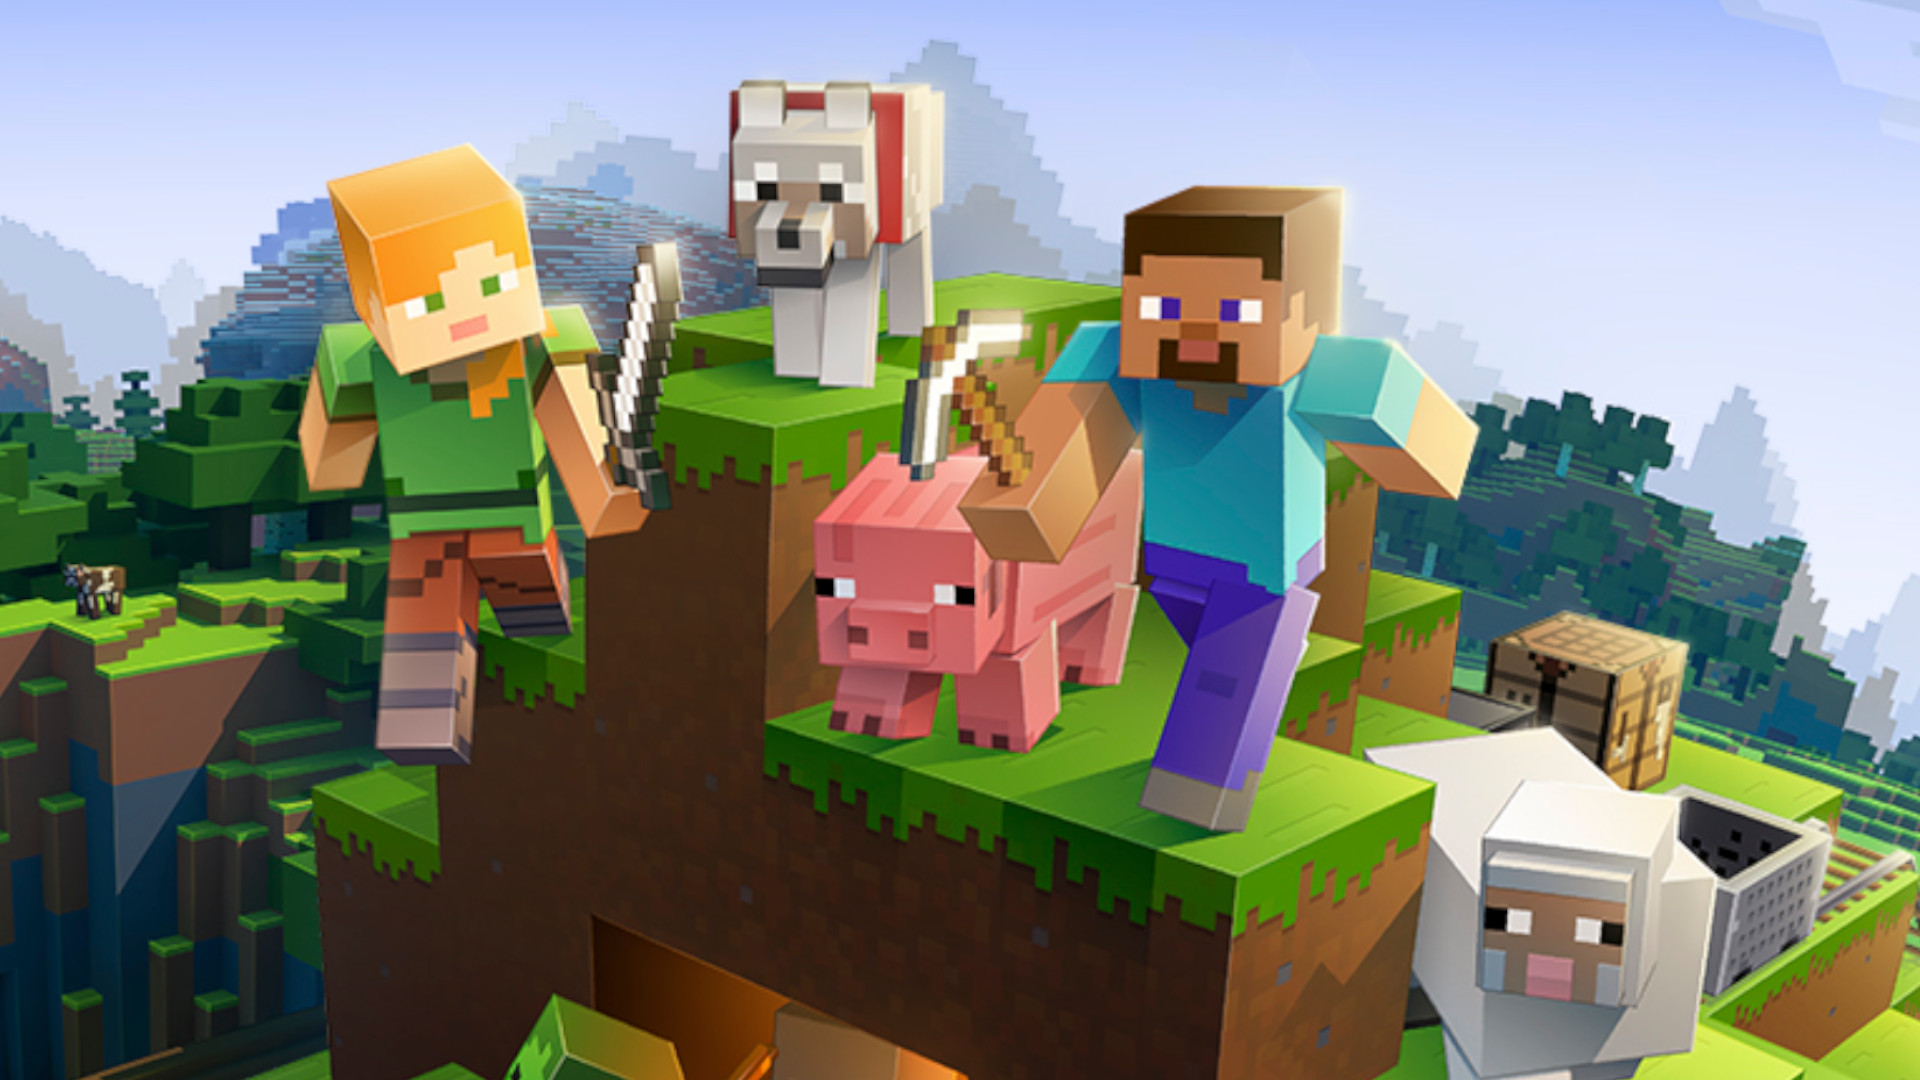 Minecraft's new moderation features have some players worried